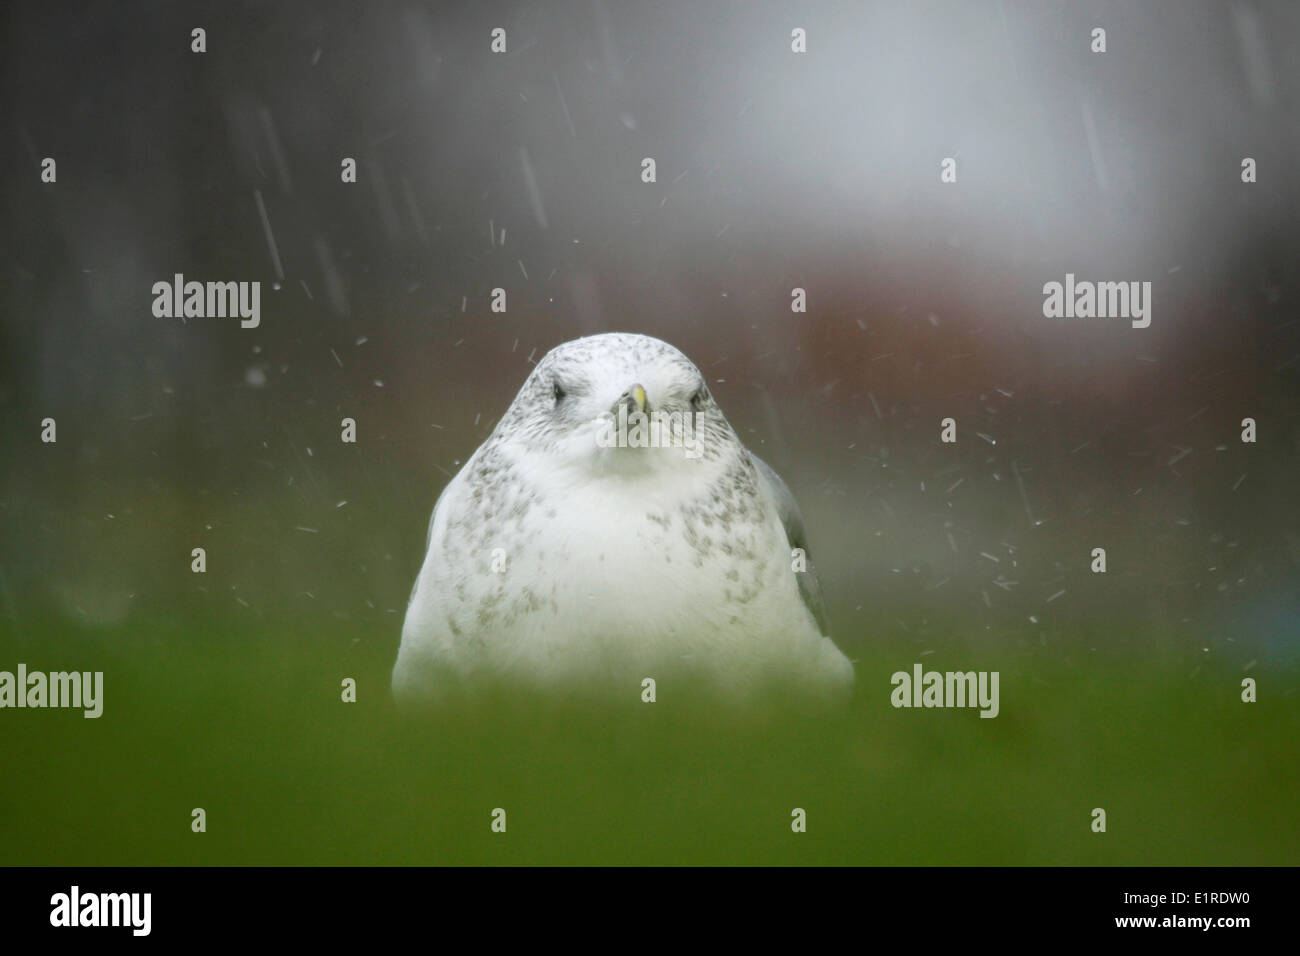 Common Gull at a lawn during heavy rainfall. Stock Photo